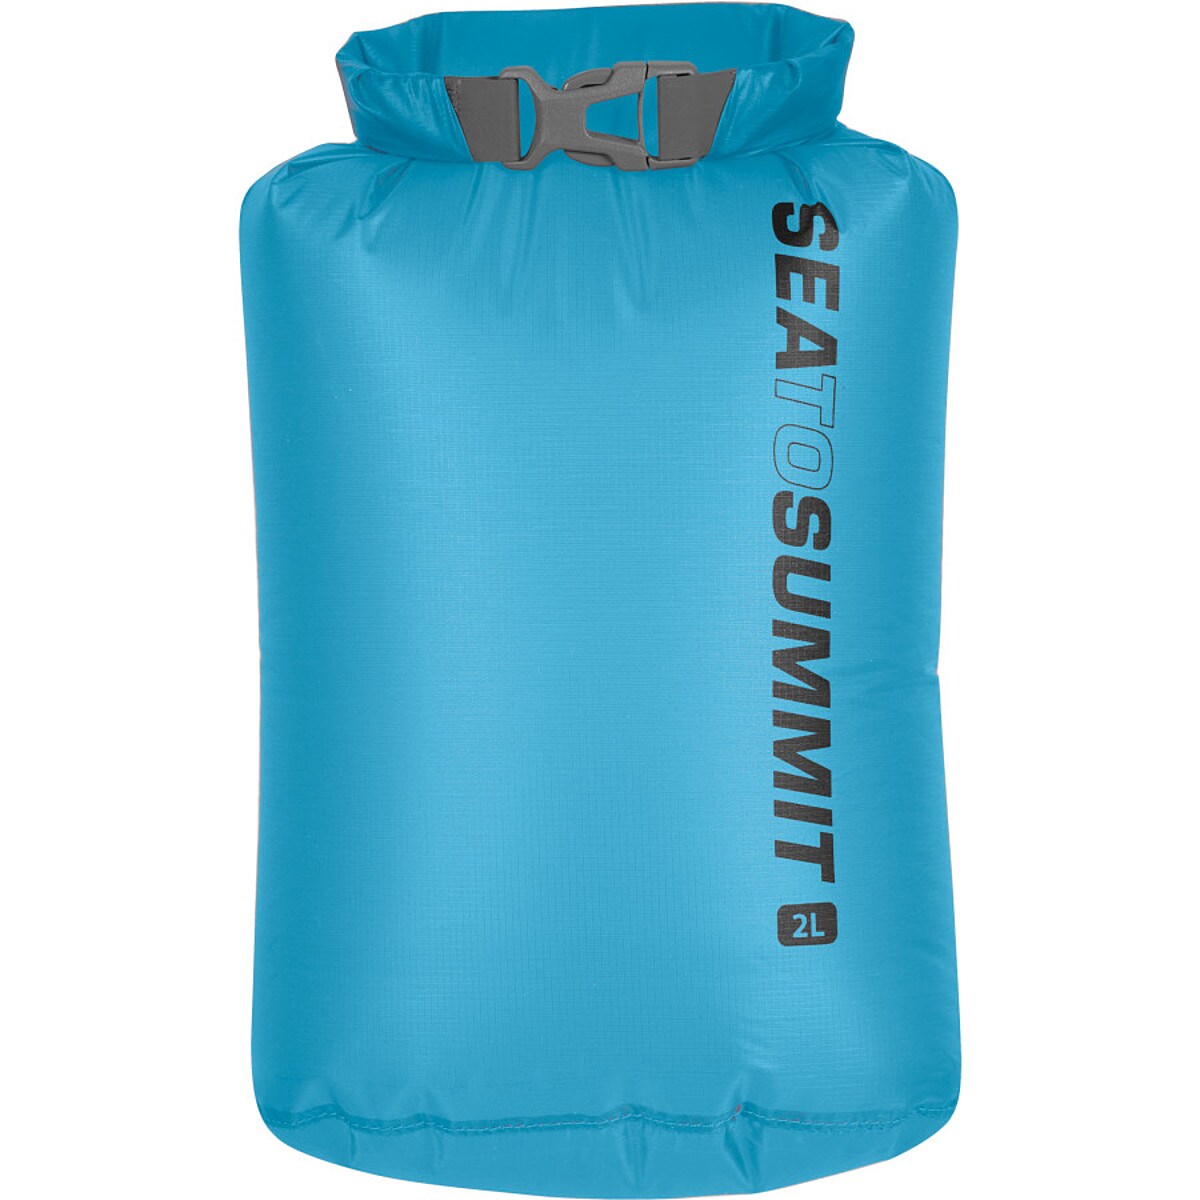 Sea to Summit - Ultra Sil Pack Cover - Medium - Pacific Blue